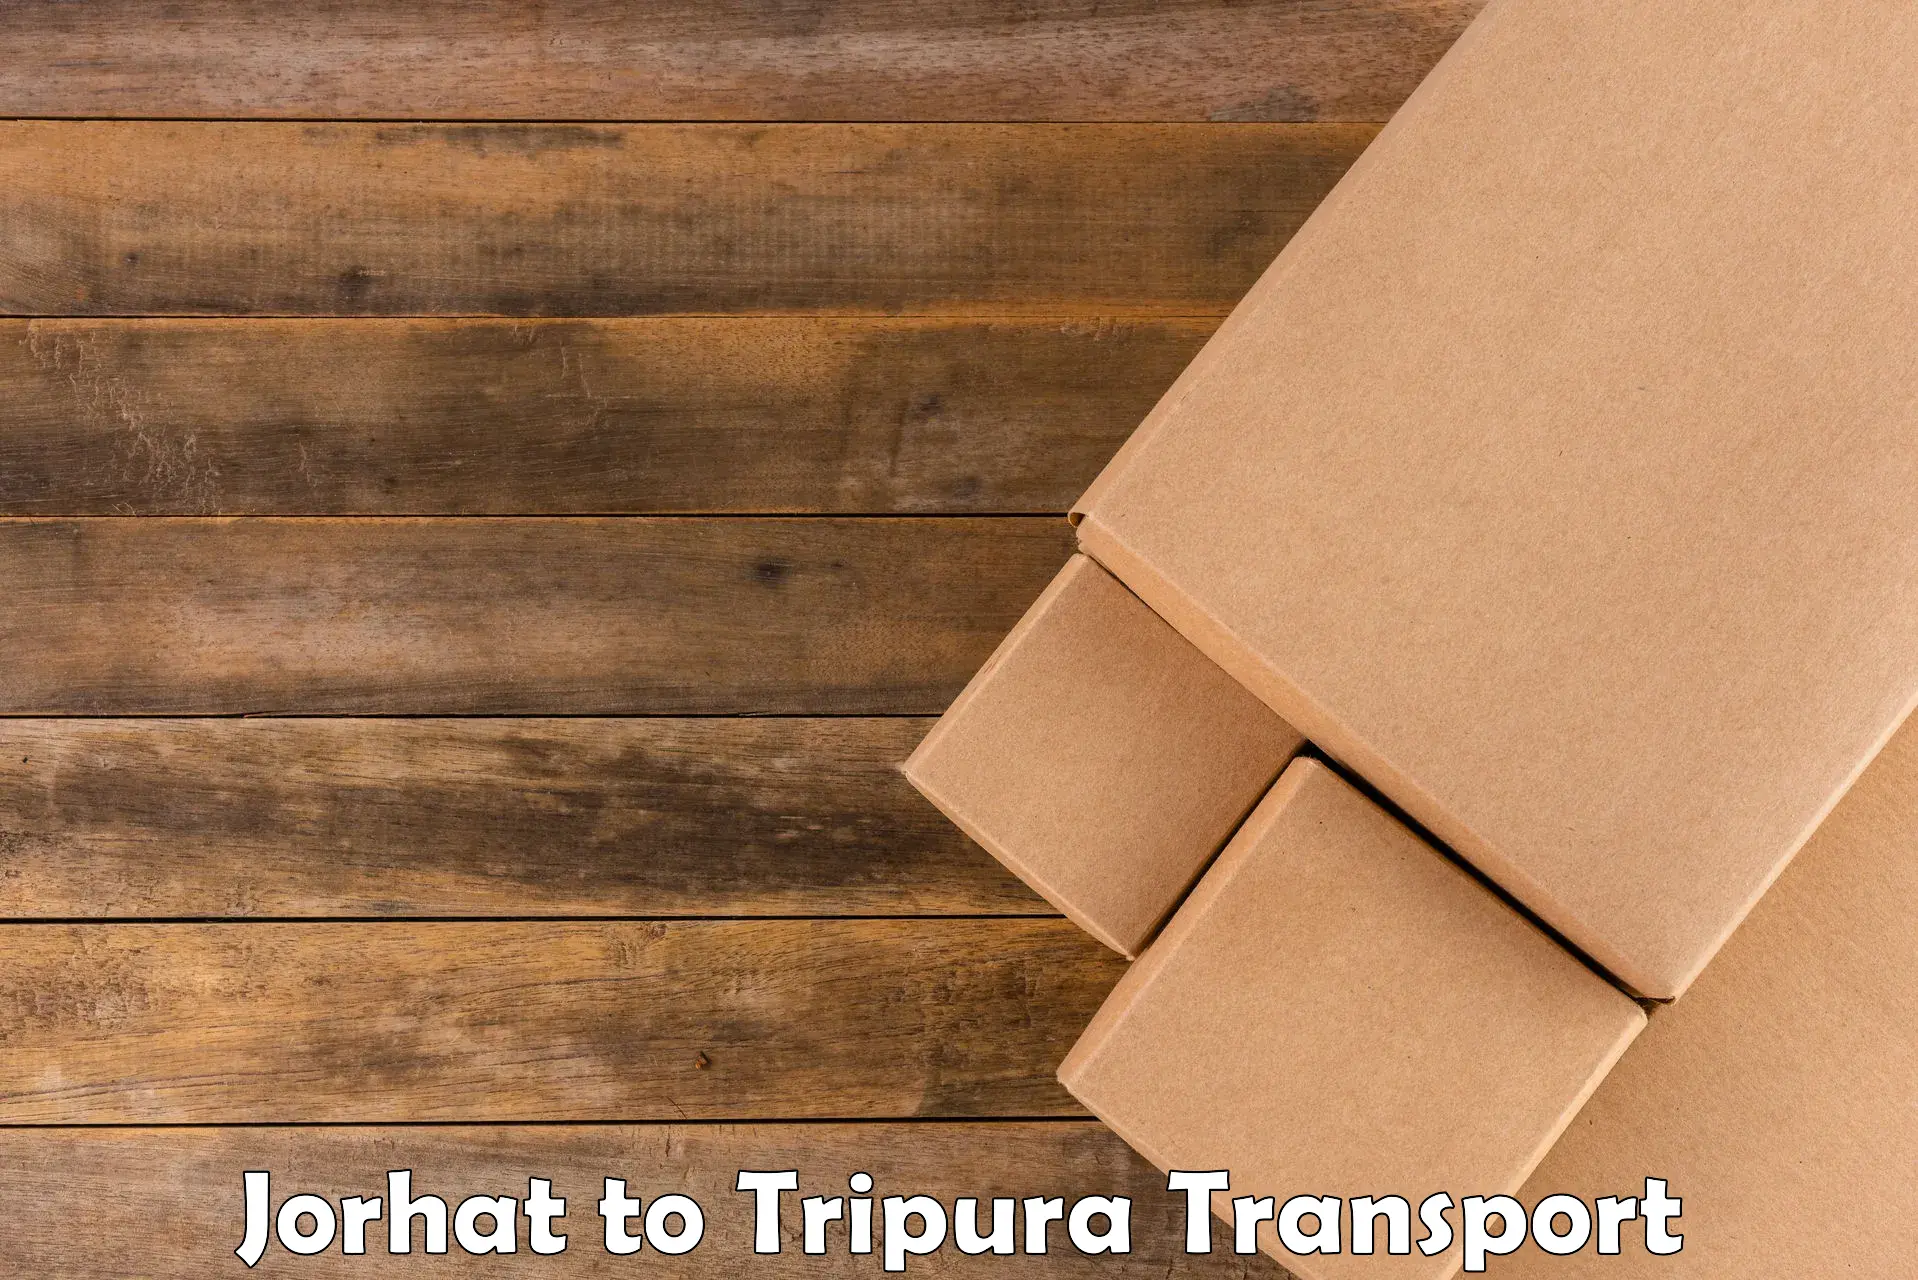 Container transportation services Jorhat to Udaipur Tripura